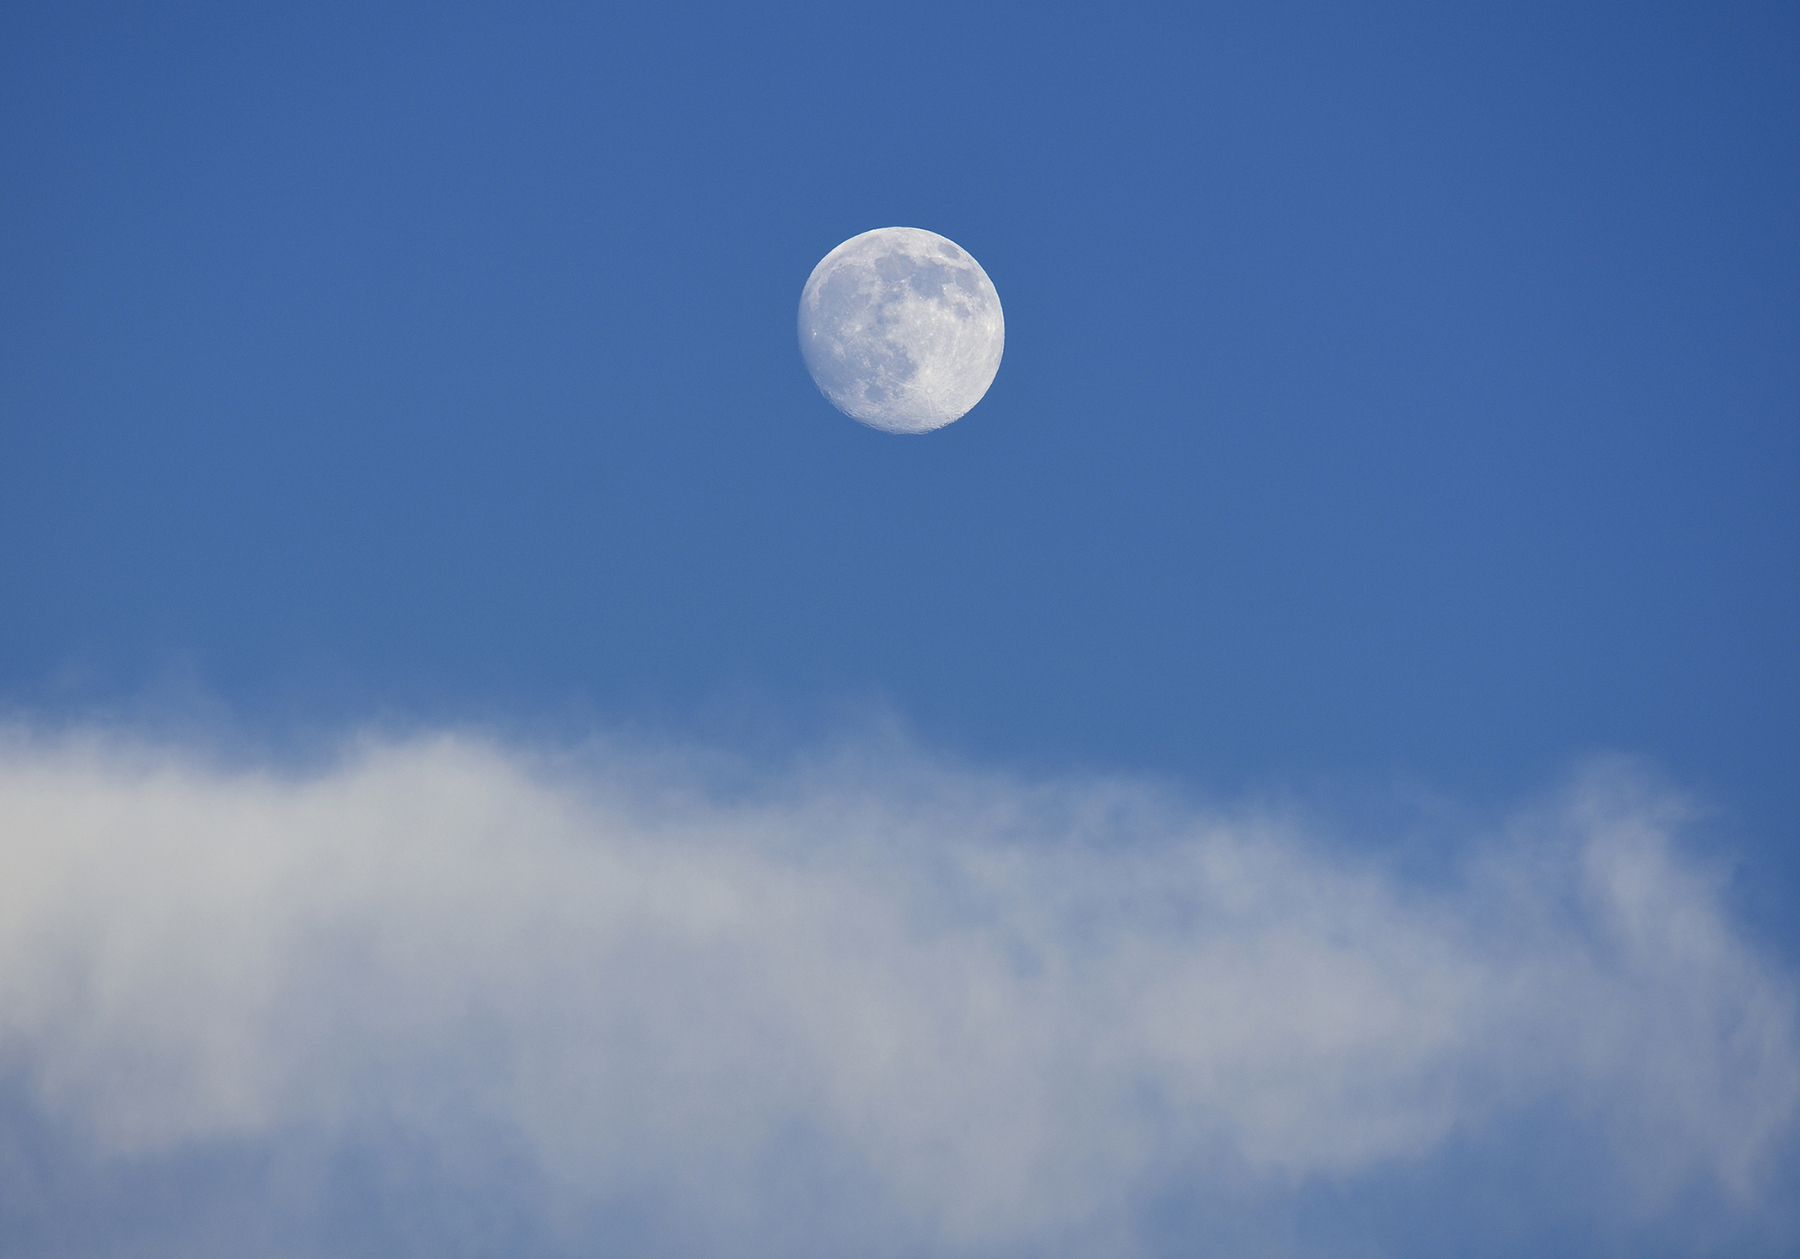 Why do we sometimes see the Moon during the day?